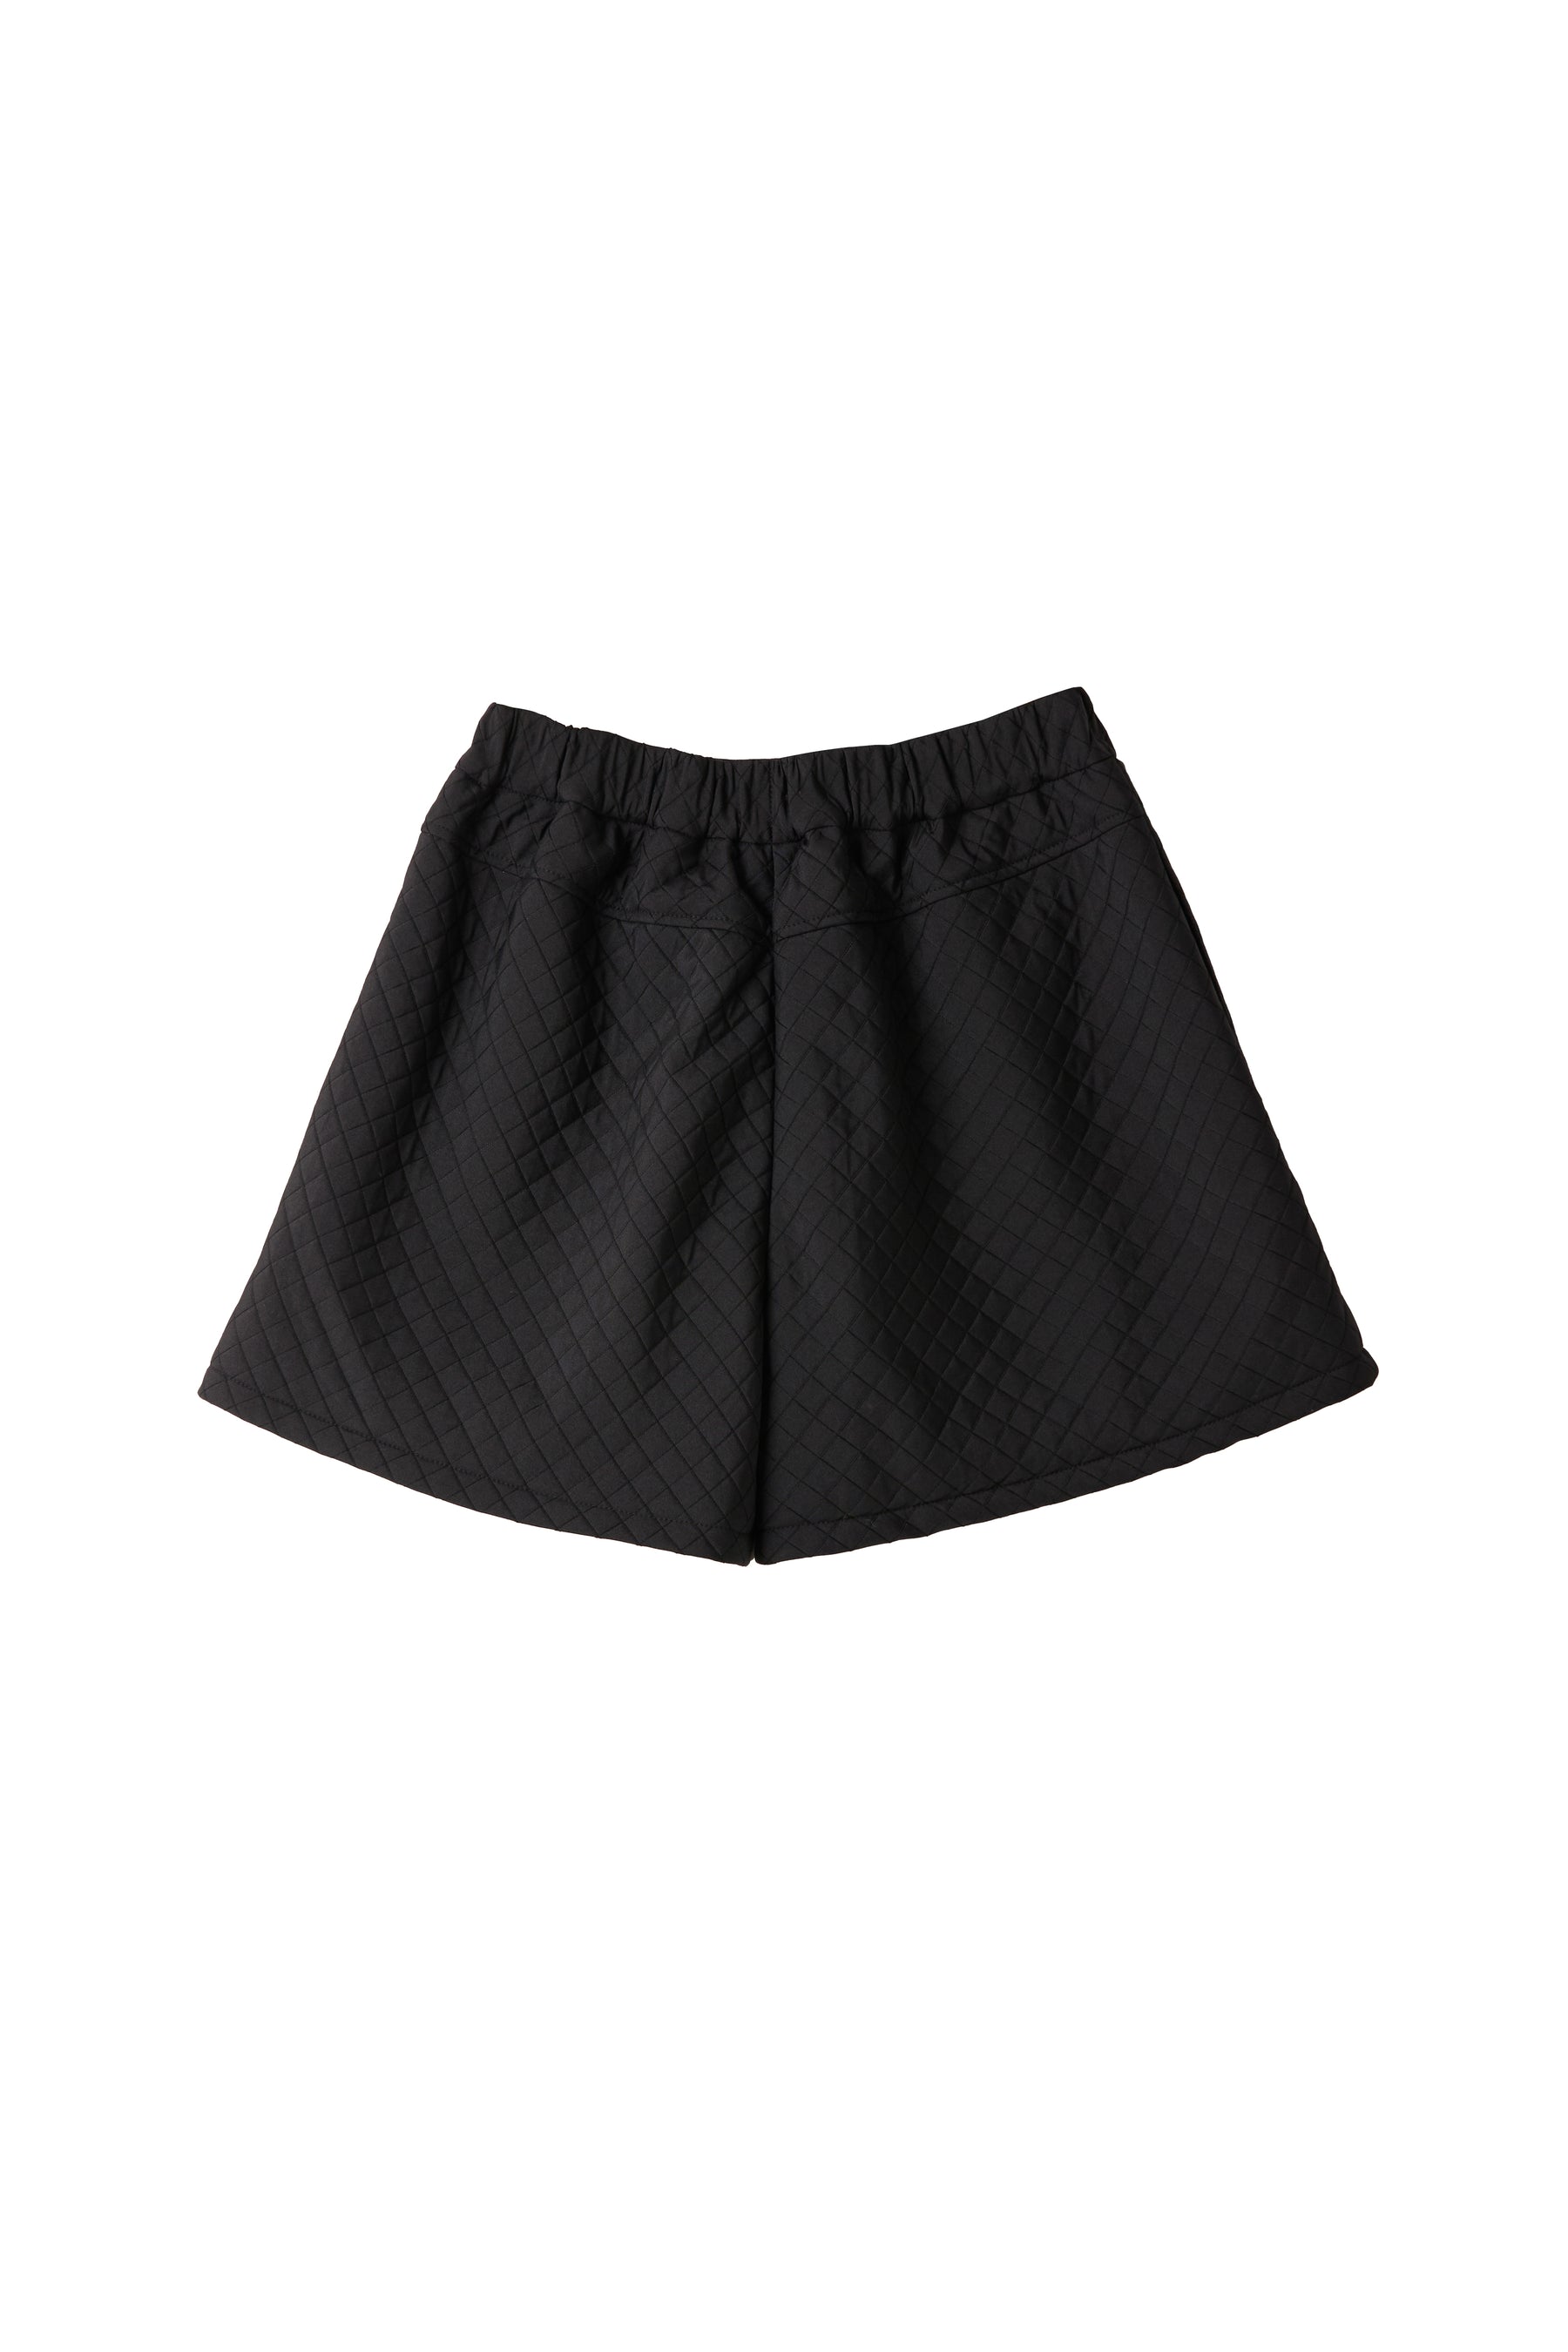 Her lip to Quilted Flare Bell Shorts